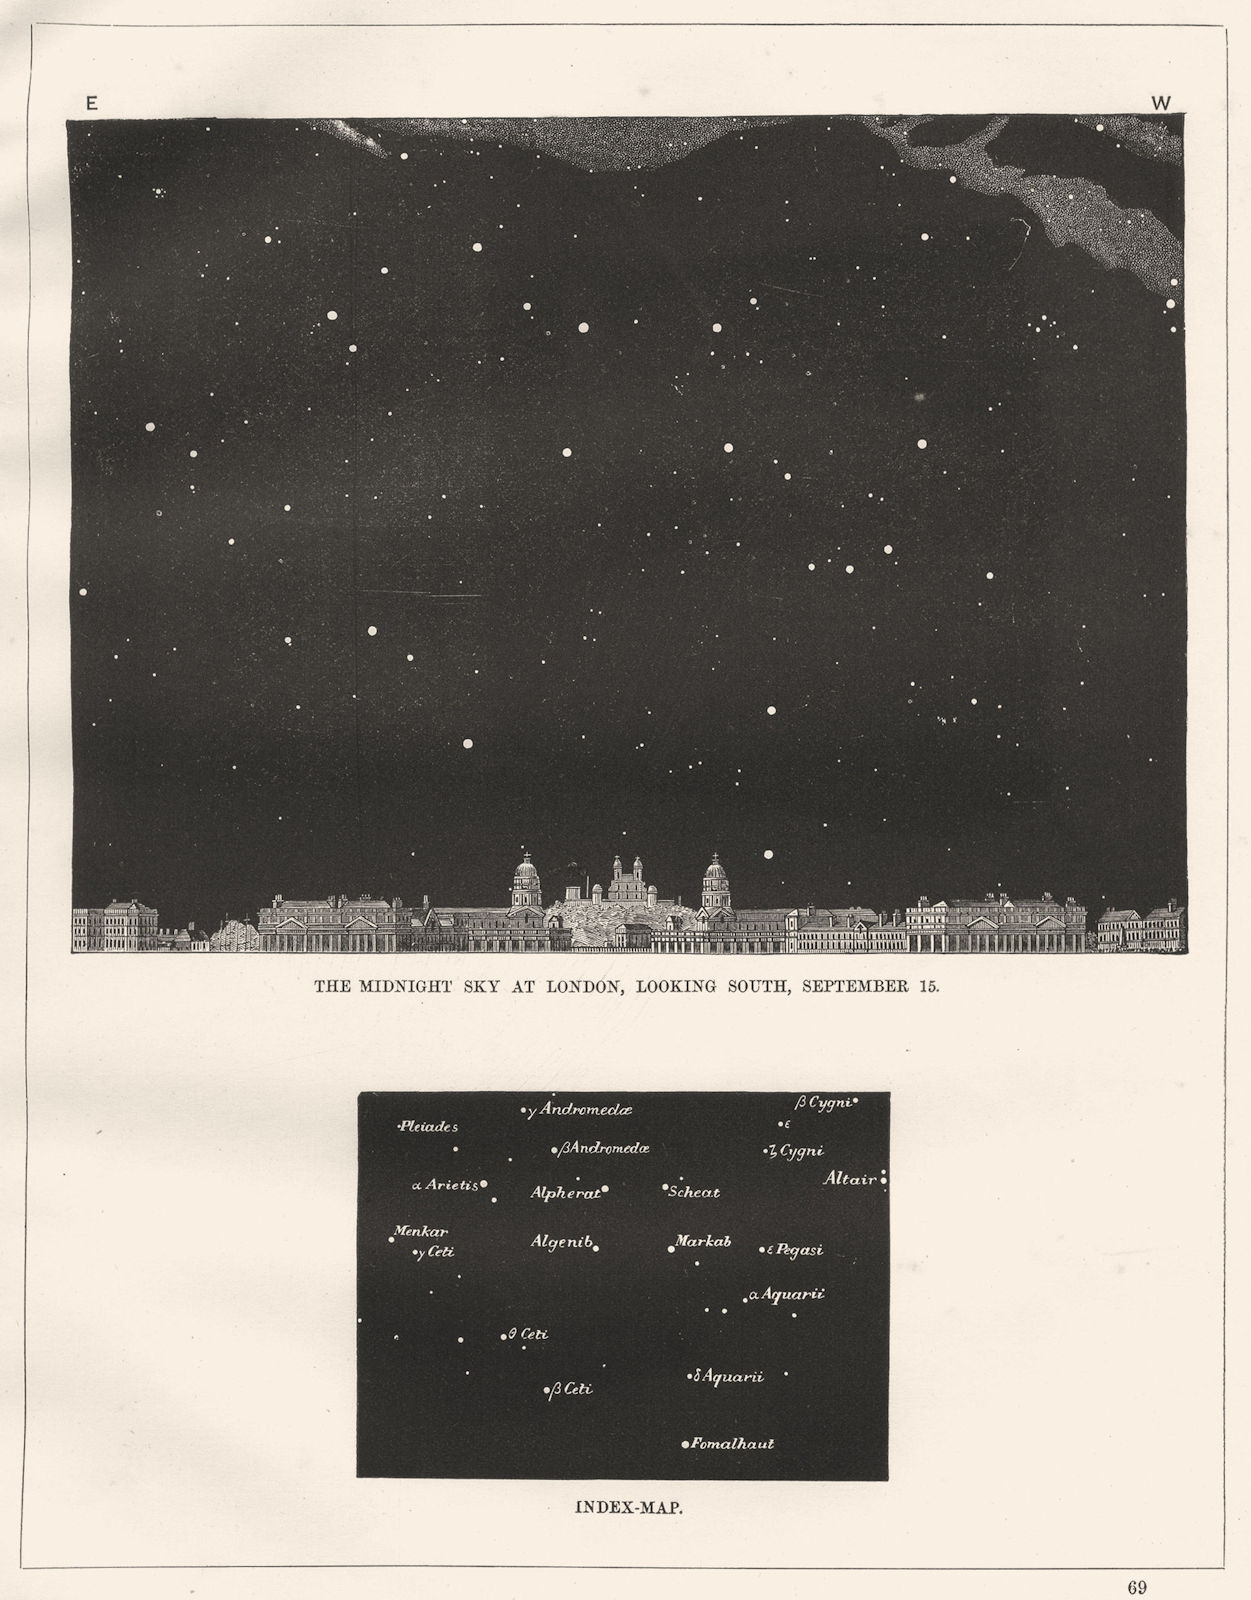 The Midnight Sky at London. Looking South, September 15. Greenwich 1869 print